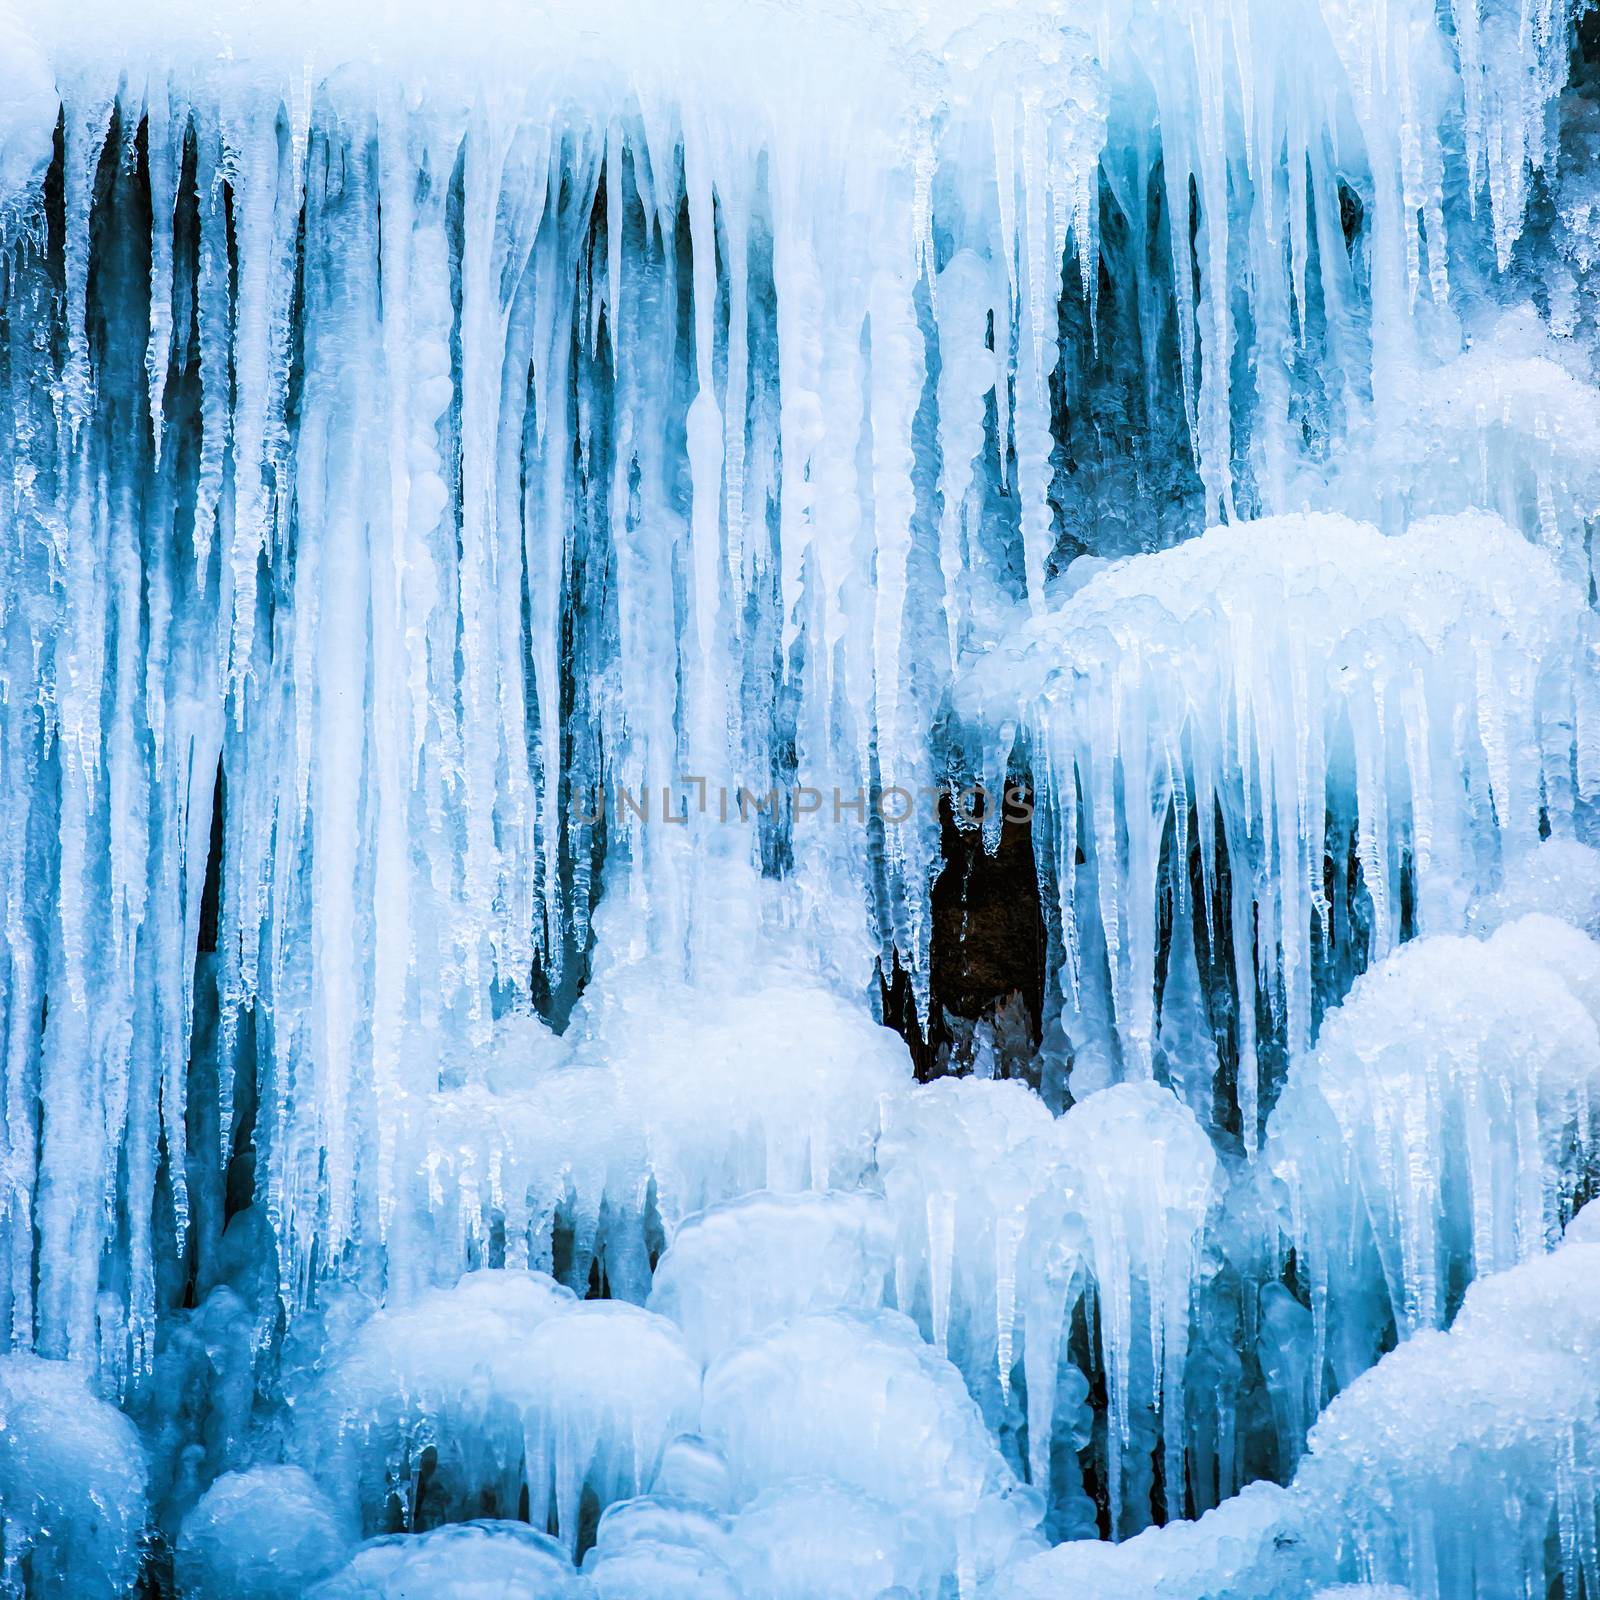 Frozen ice waterfall of blue icicles on the rock